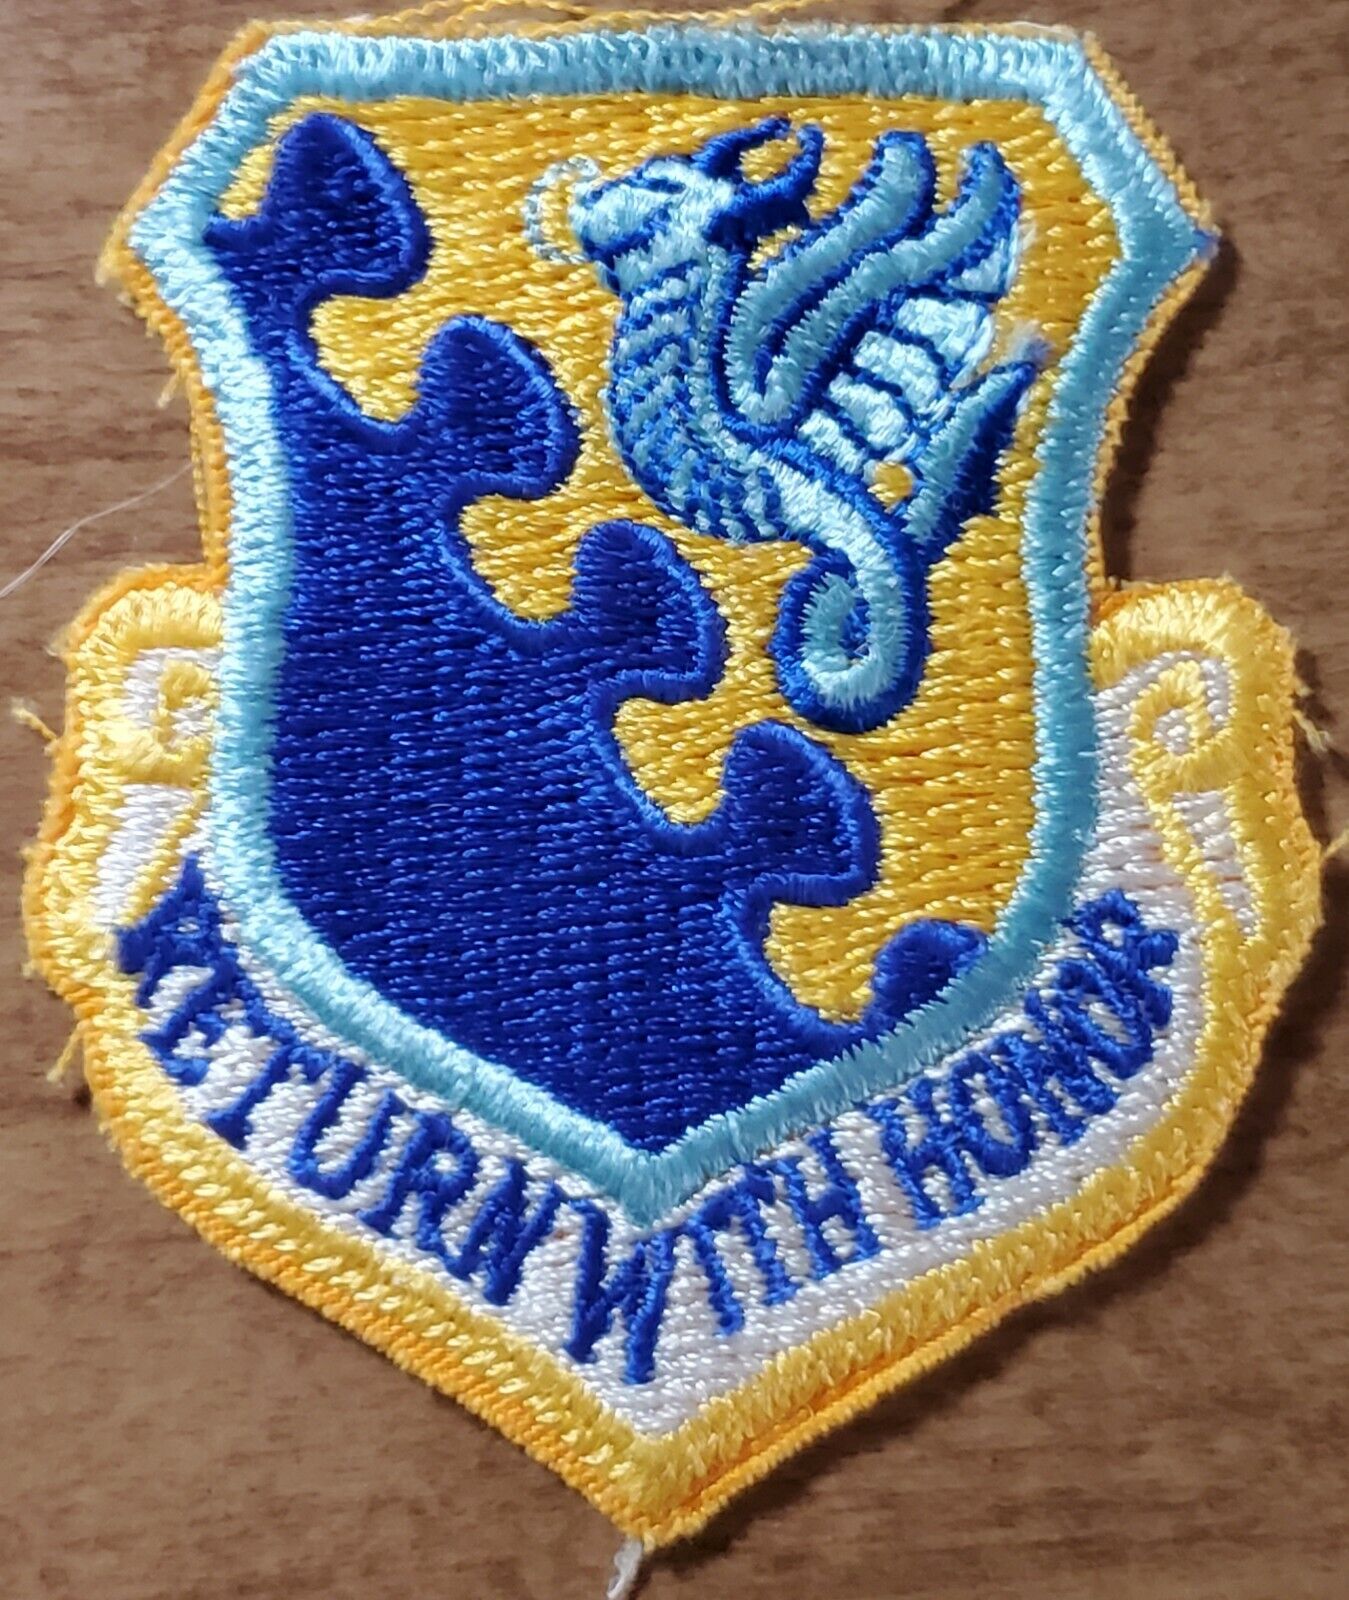 USAF 31st FIGHTER WG RETURN WITH HONOR color SQUADRON Patch AVIANO AB, ITALY vtg